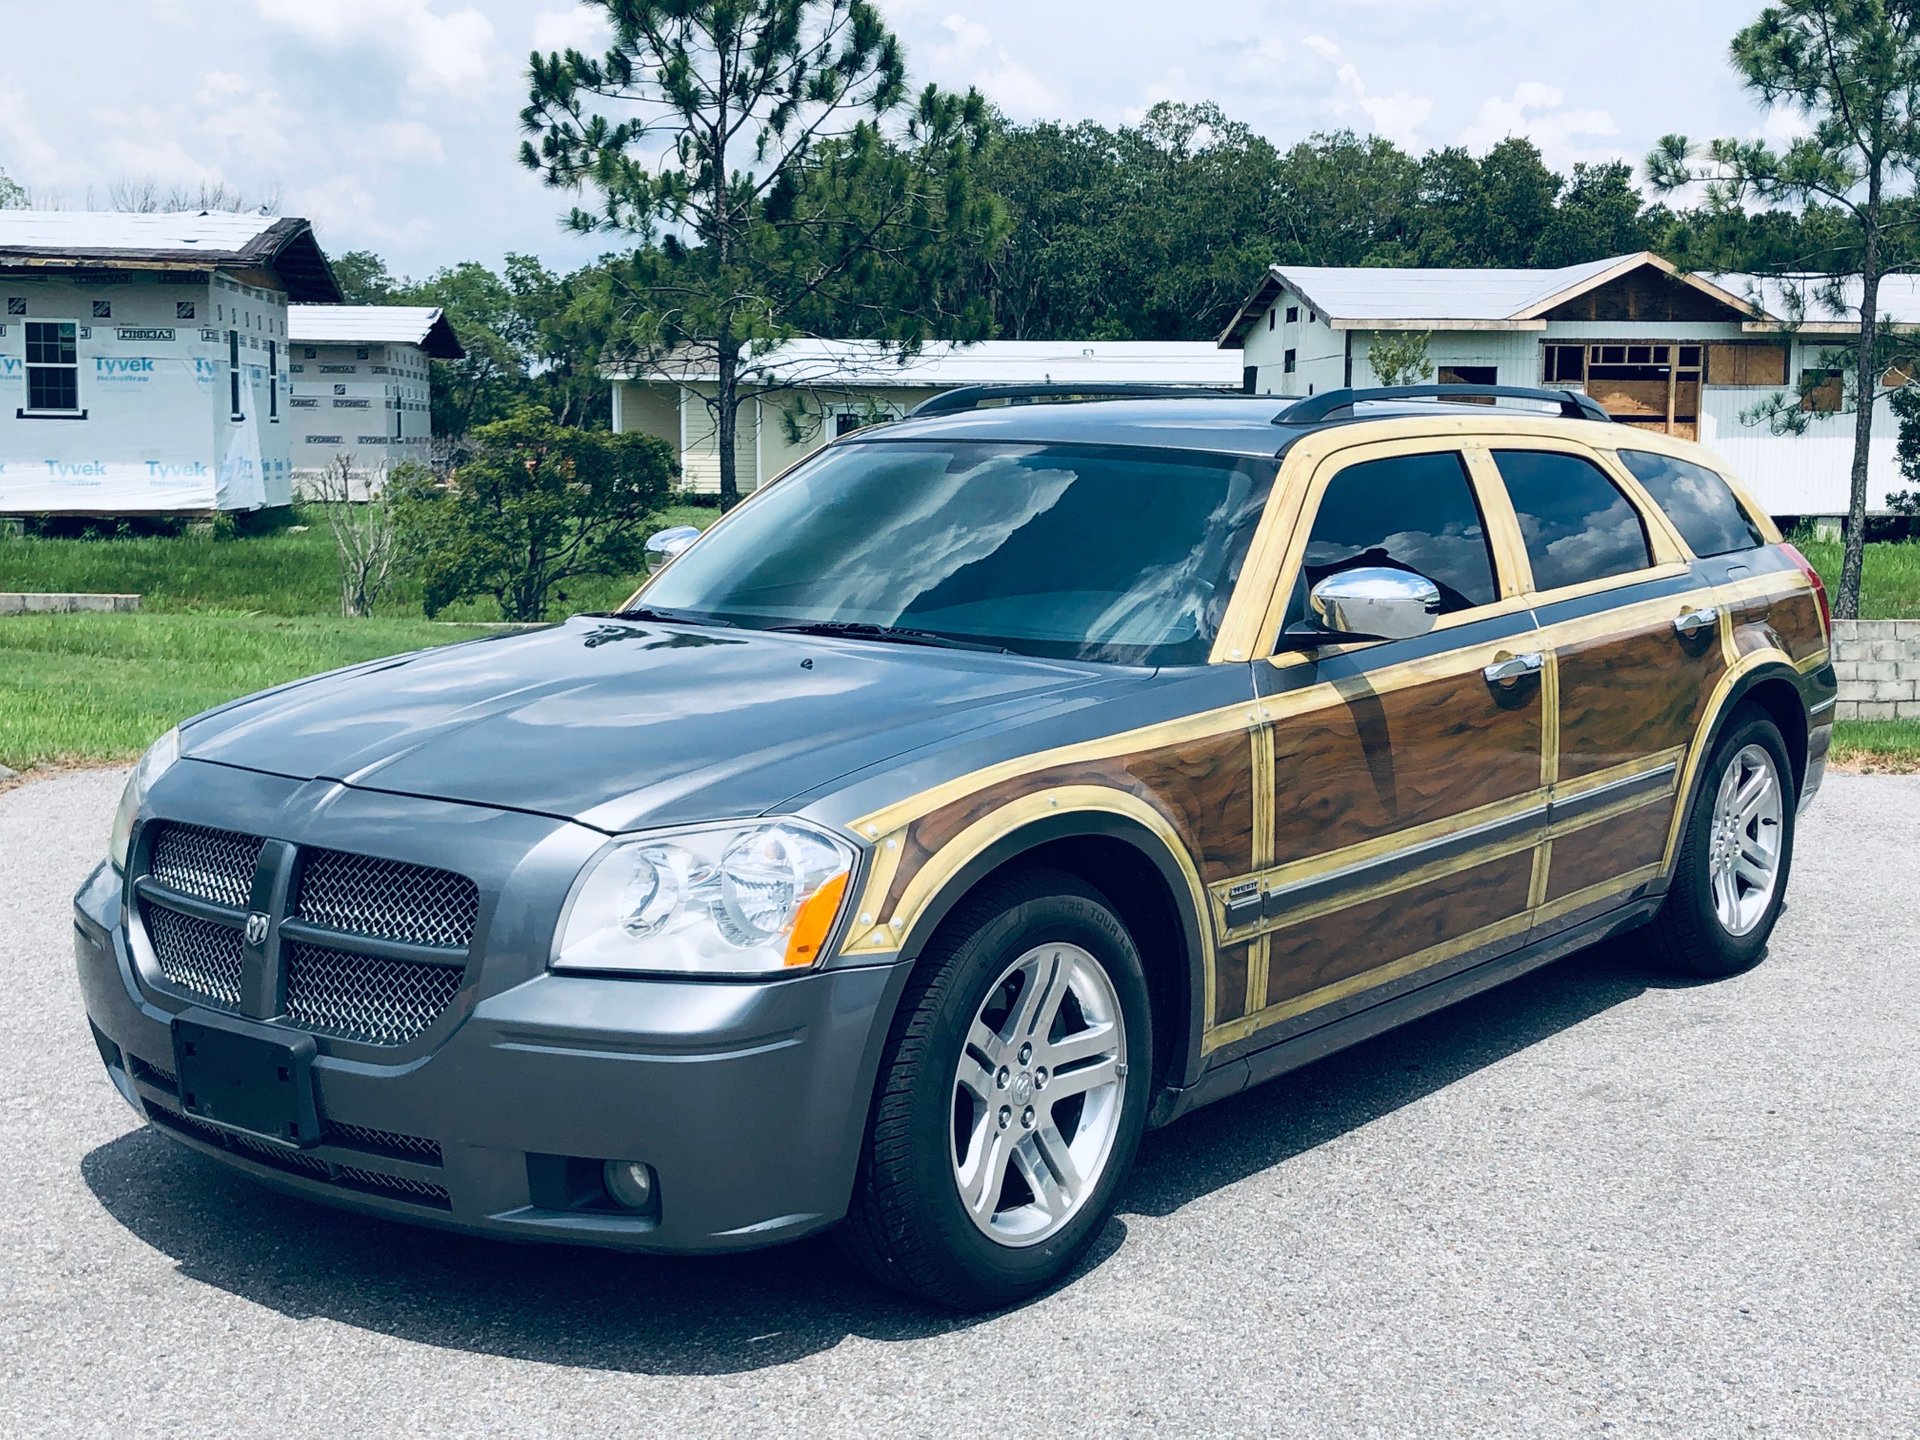 dodge magnum for sale cheap 2005 Dodge Magnum  Classic Cars & Used Cars For Sale in